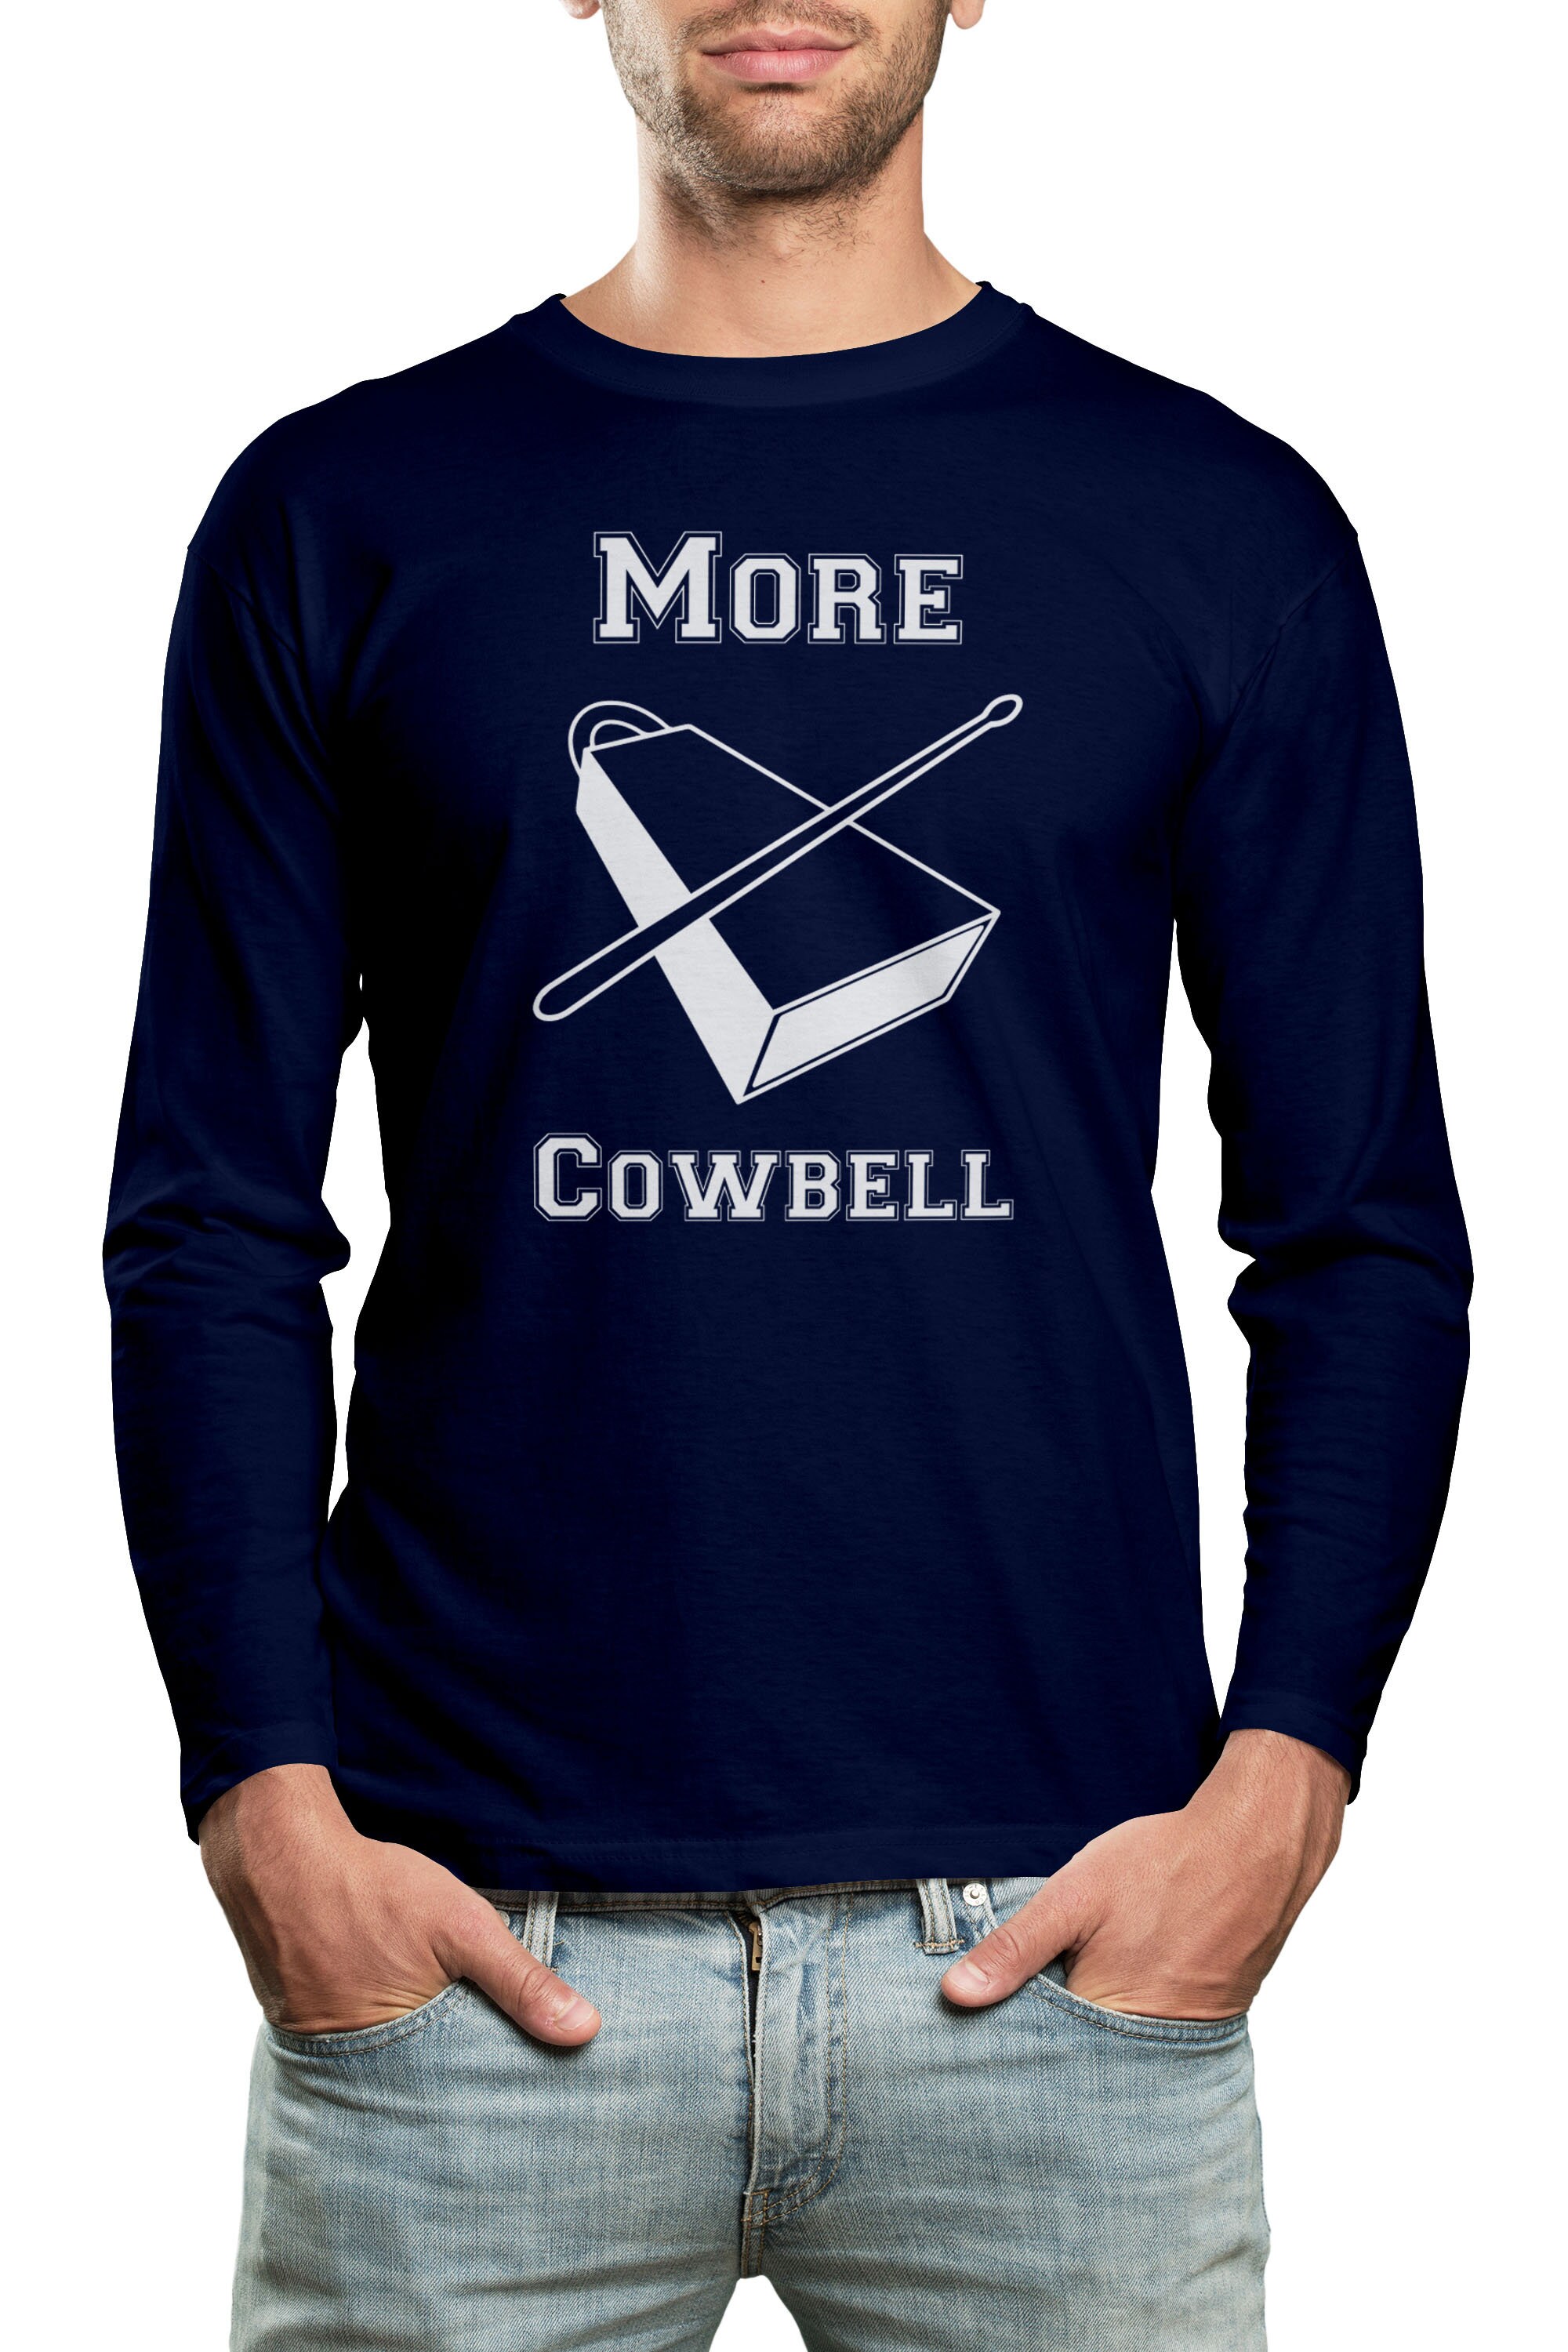 Need More Cowbell? - The Ultimate Cowbell Shootout